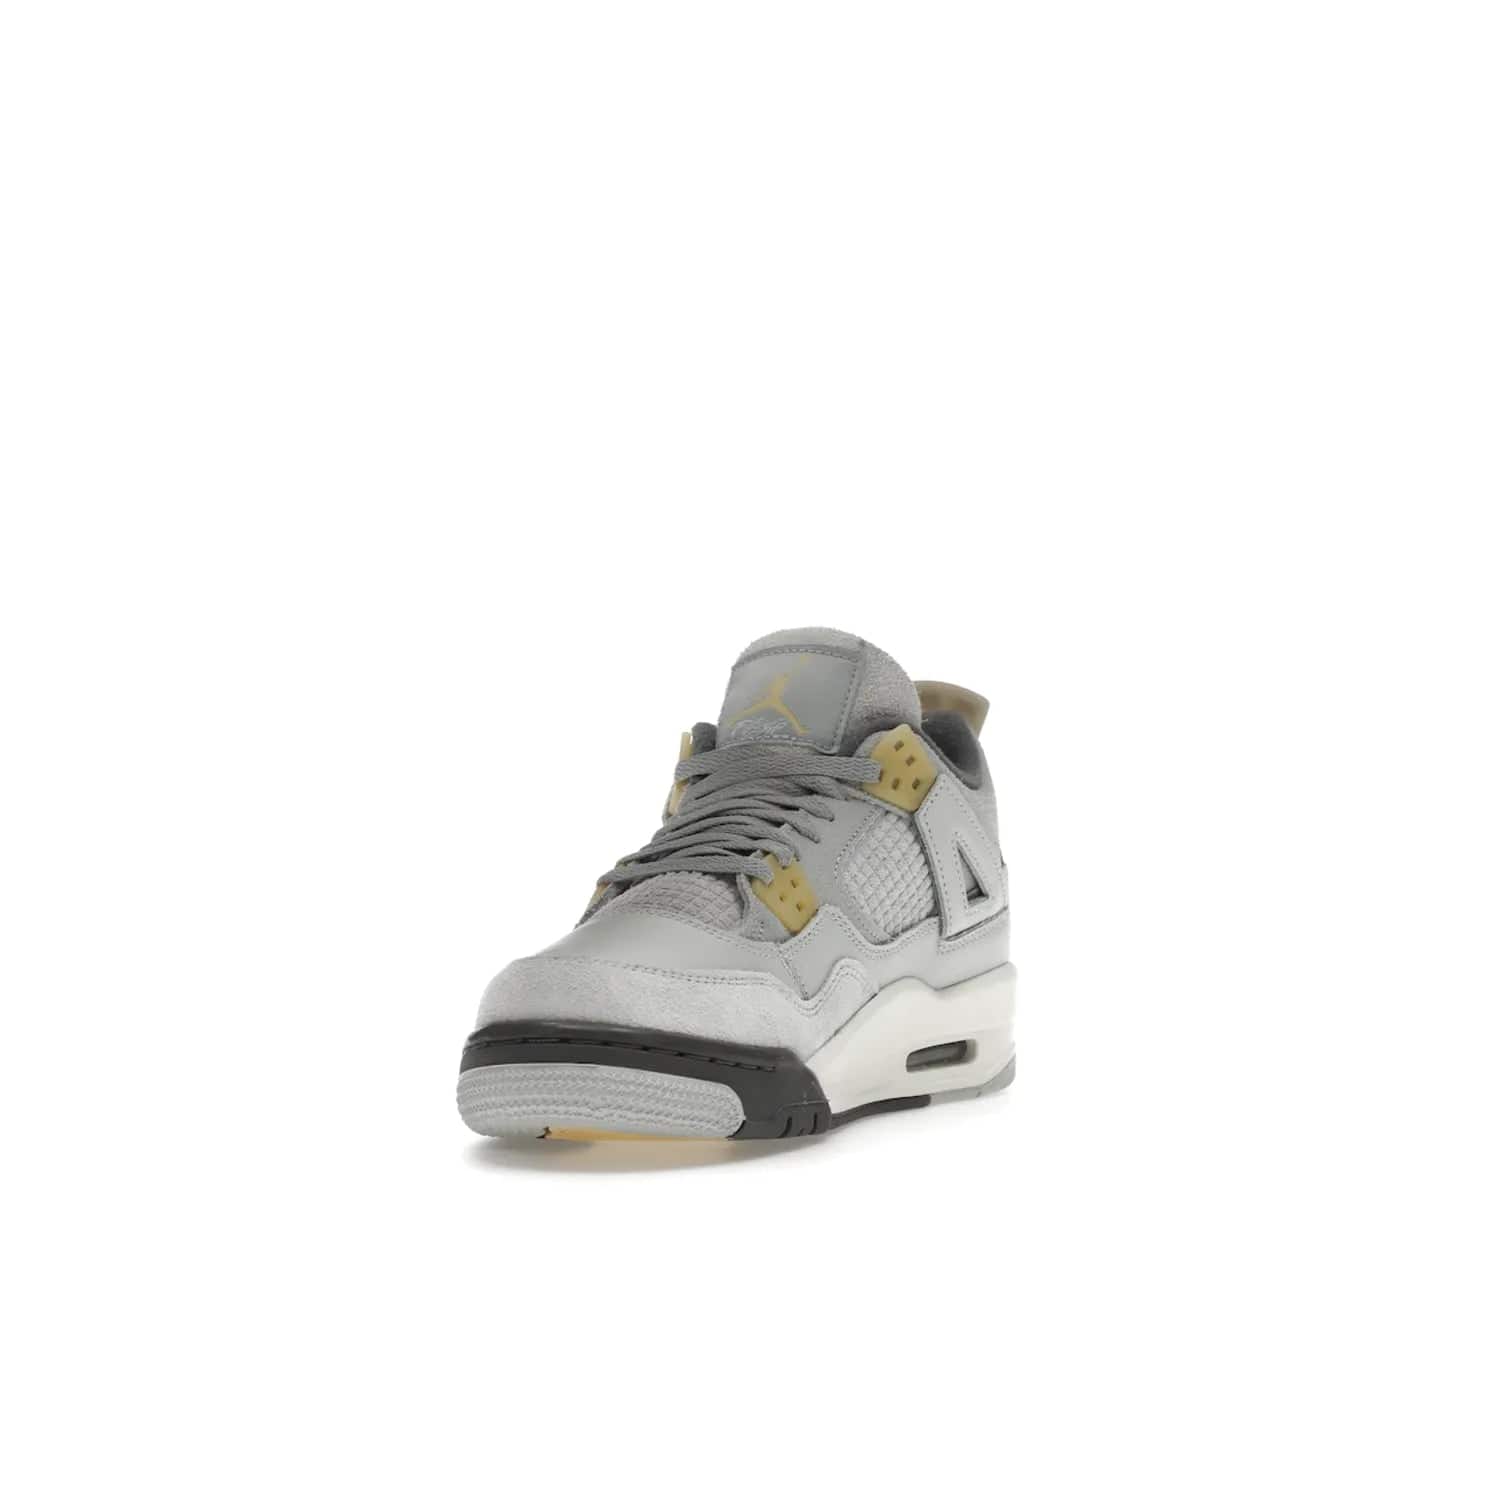 Jordan 4 Retro SE Craft Photon Dust (GS) - Image 13 - Only at www.BallersClubKickz.com - Shop the Jordan 4 Retro SE Craft Photon Dust (GS), the ultimate mix of style and comfort. With photonic dust, pale vanilla, off-white, grey fog, flat pewter and sail colorway, foam midsole, and rubber outsole, don't miss this special edition Jordan 4 releasing Feb 11, 2023.